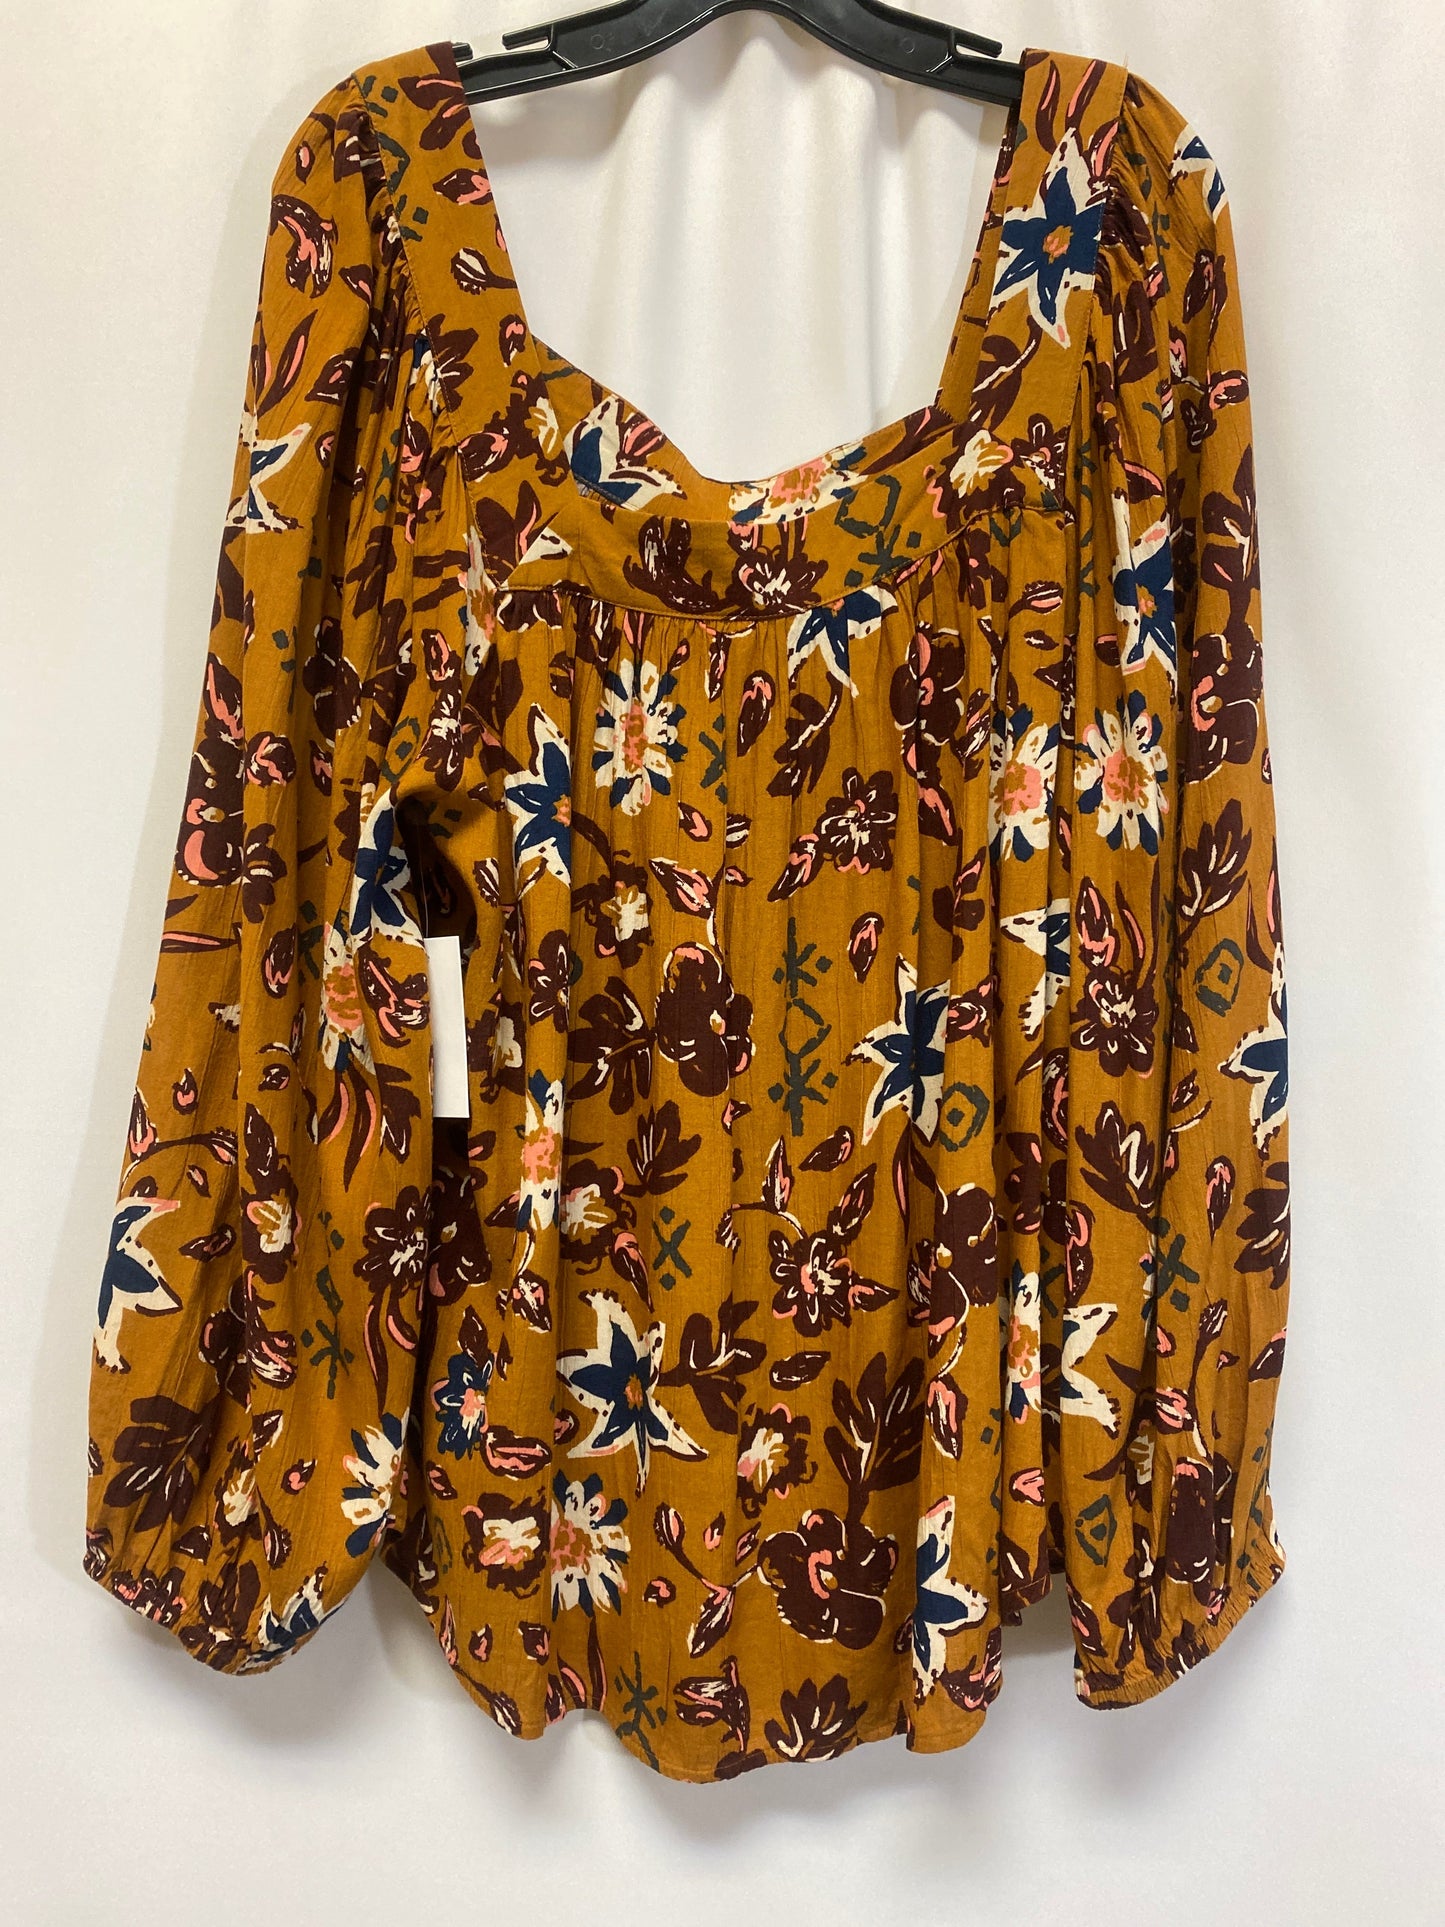 Brown Top Long Sleeve Sonoma, Size 1x